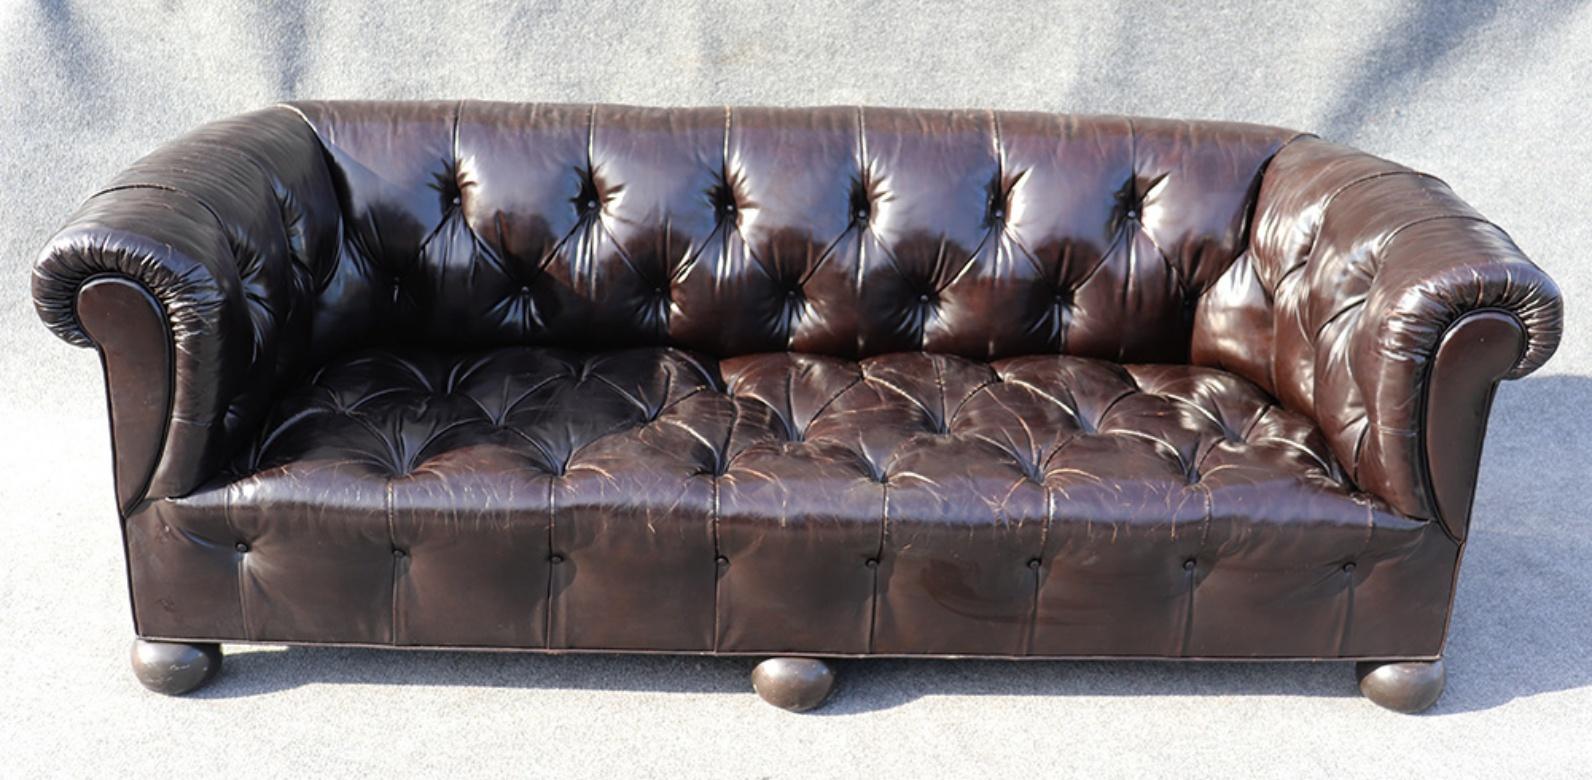 There are many chesterfields online, but few are actually antique! This is an antique English-made chesterfield with the softest leather on bun feet.